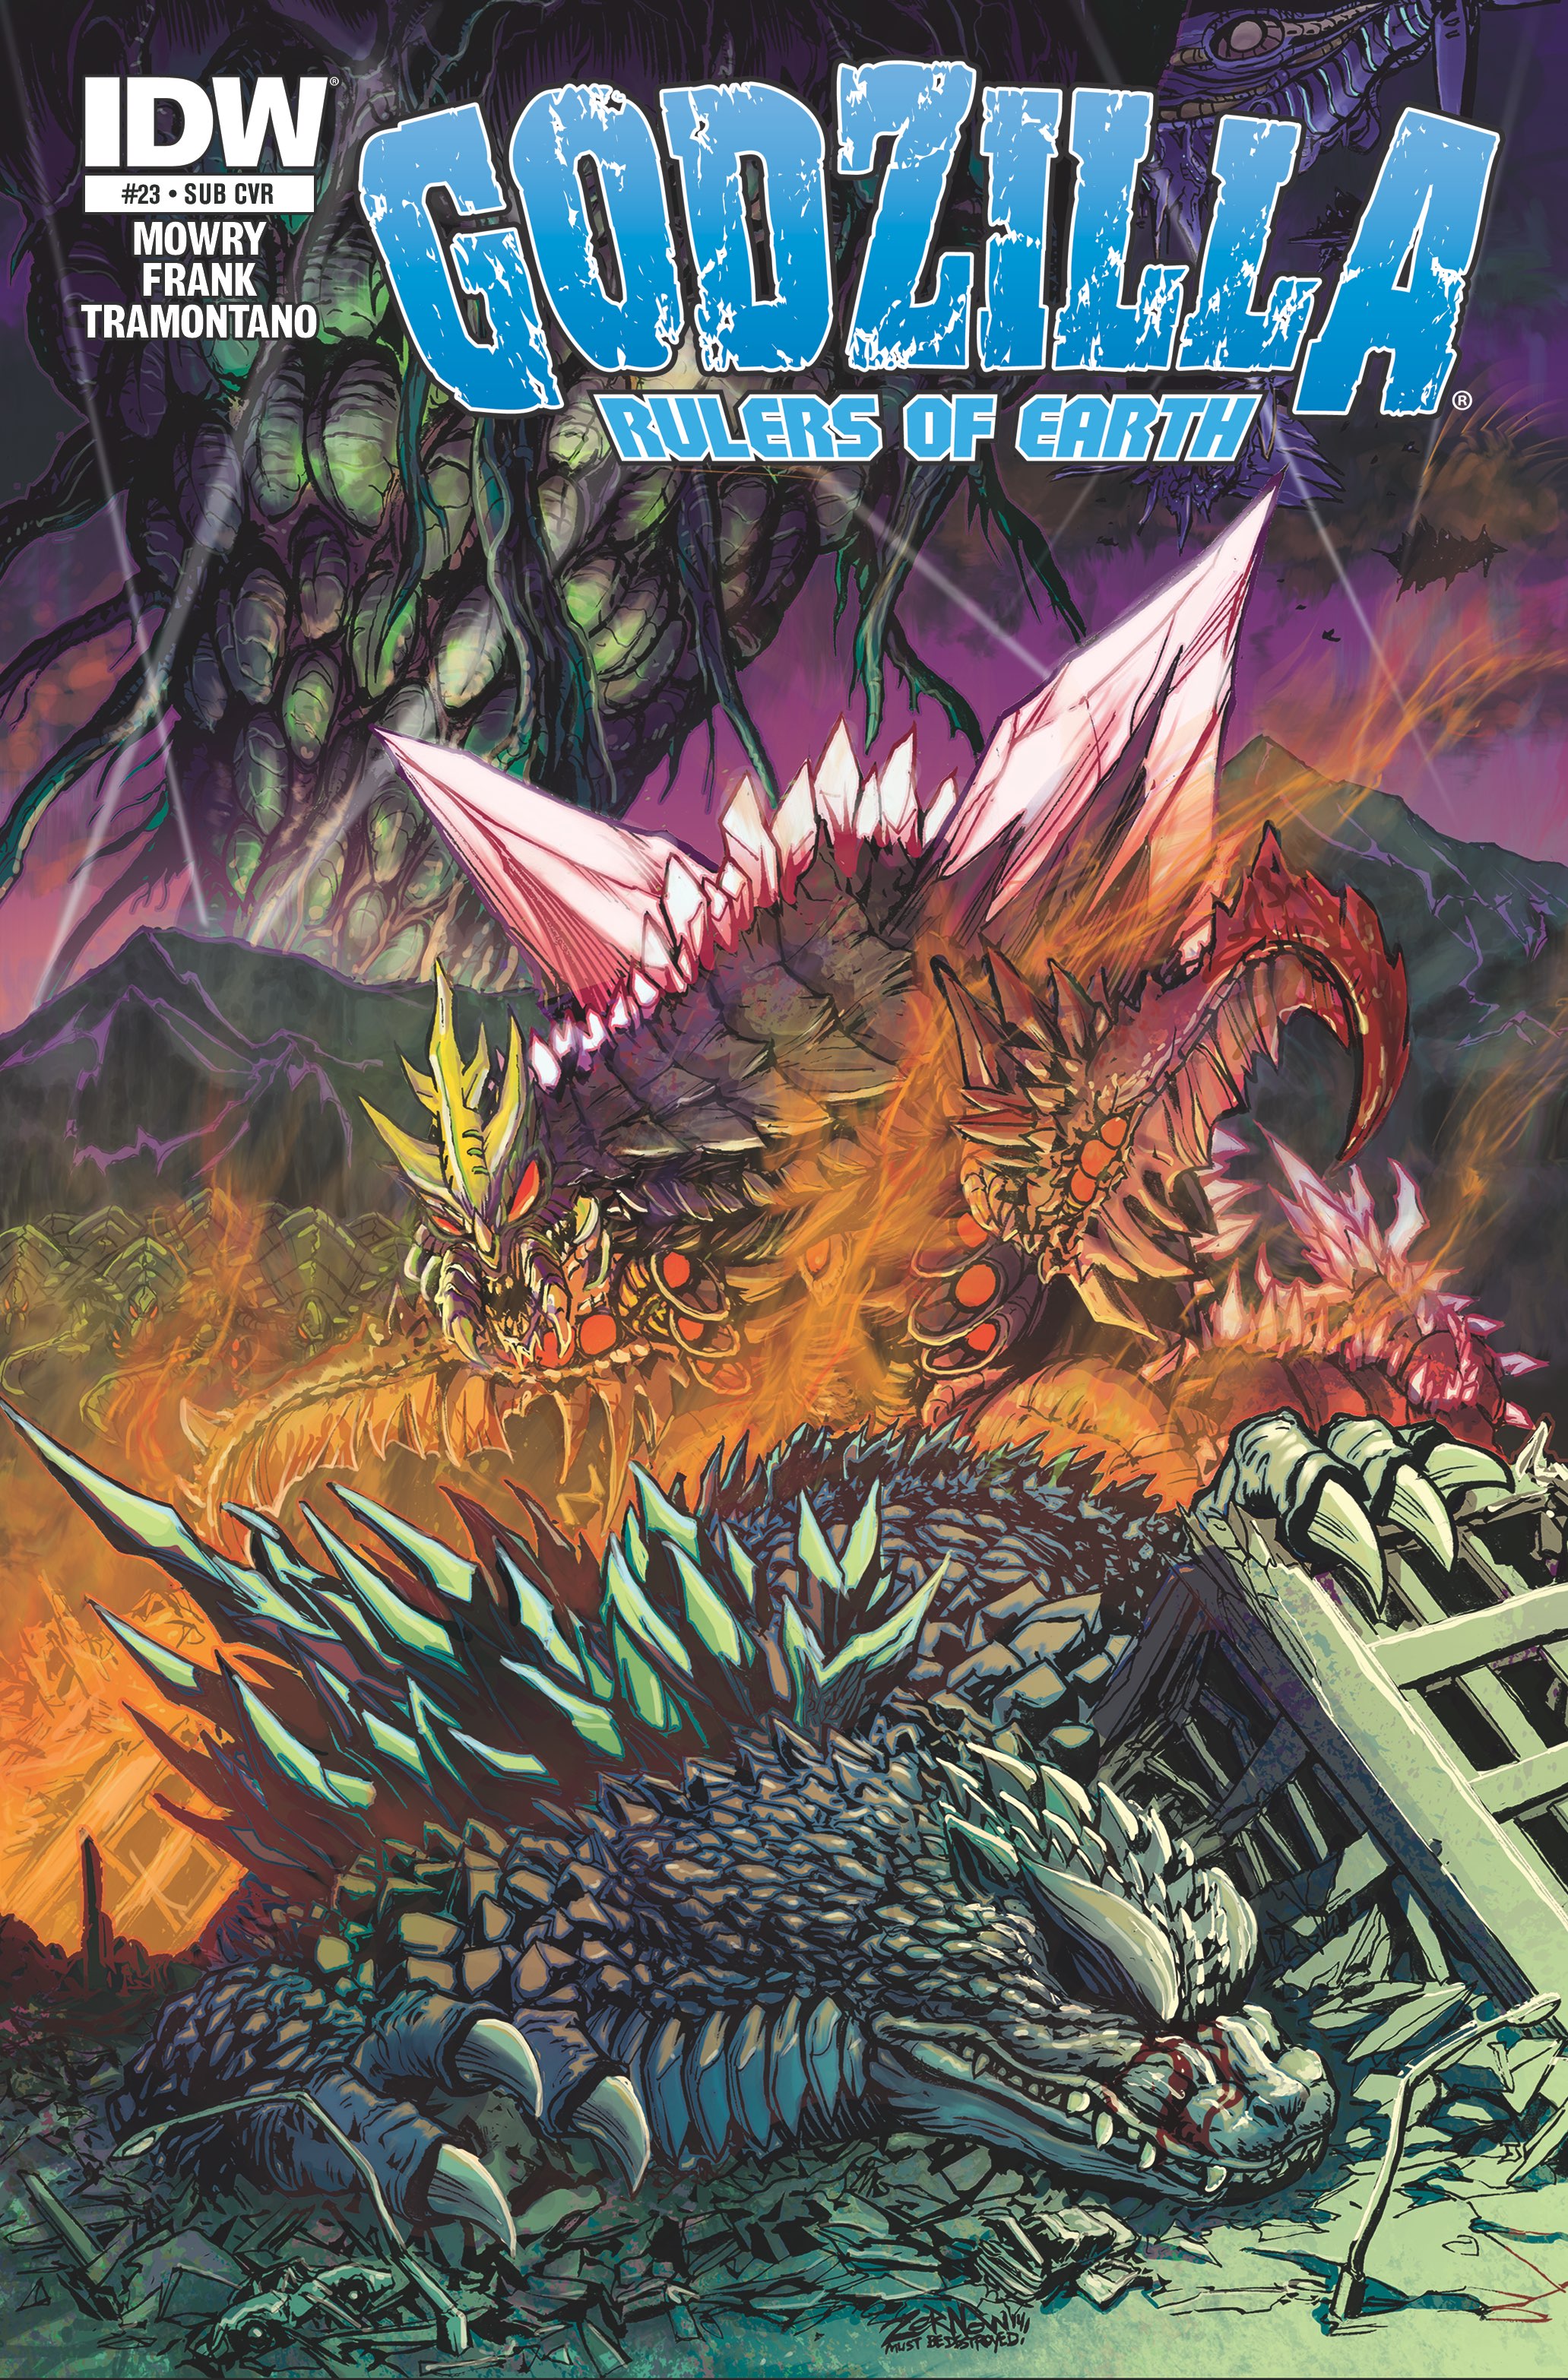 GODZILLA: Rulers of Earth #23 Review